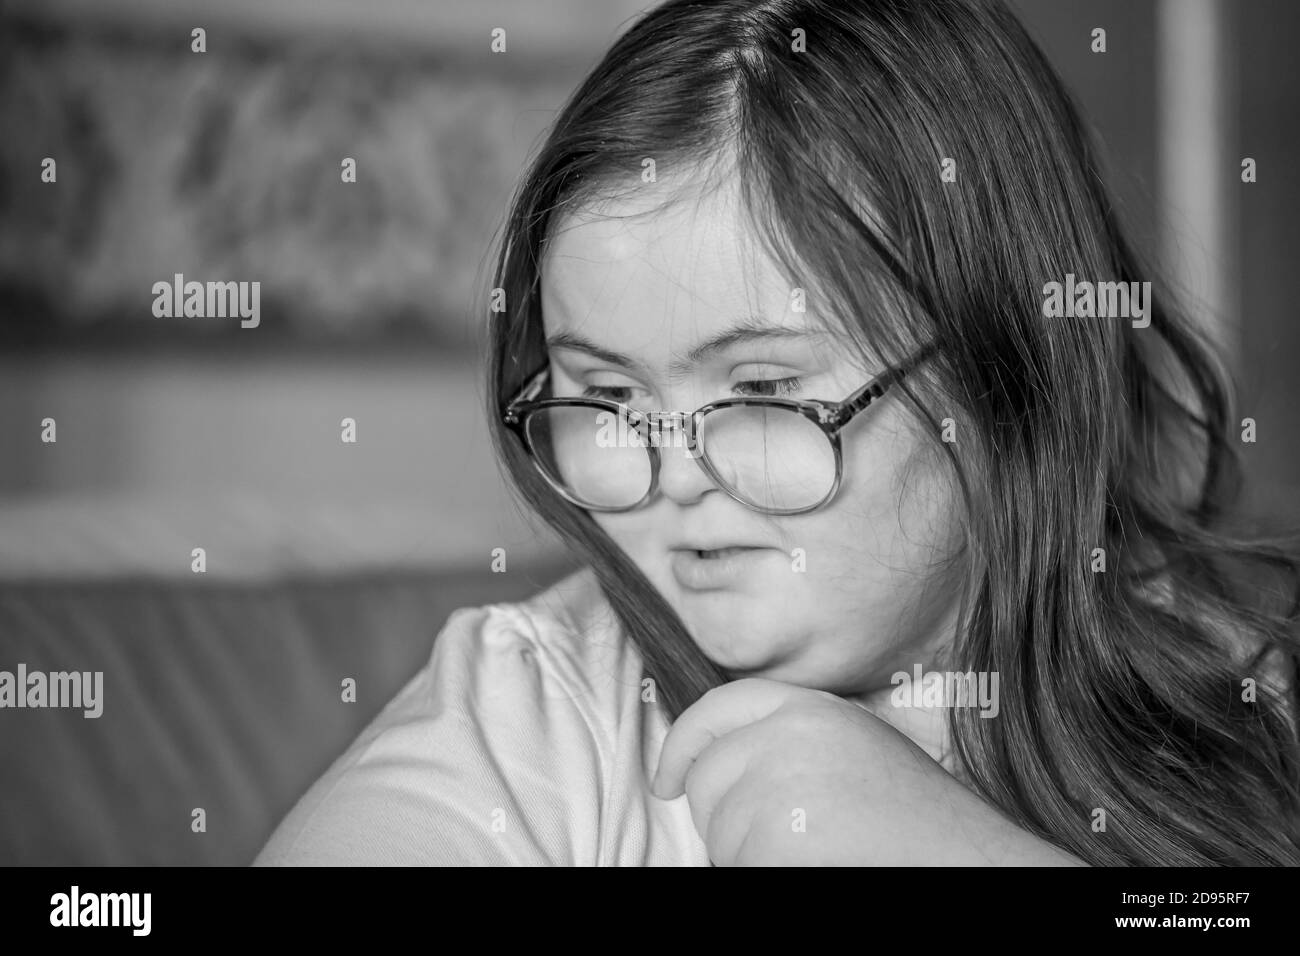 Young female teenage with Downs Syndrome brushing her hair indoors, Northampton, England, UK. Stock Photo